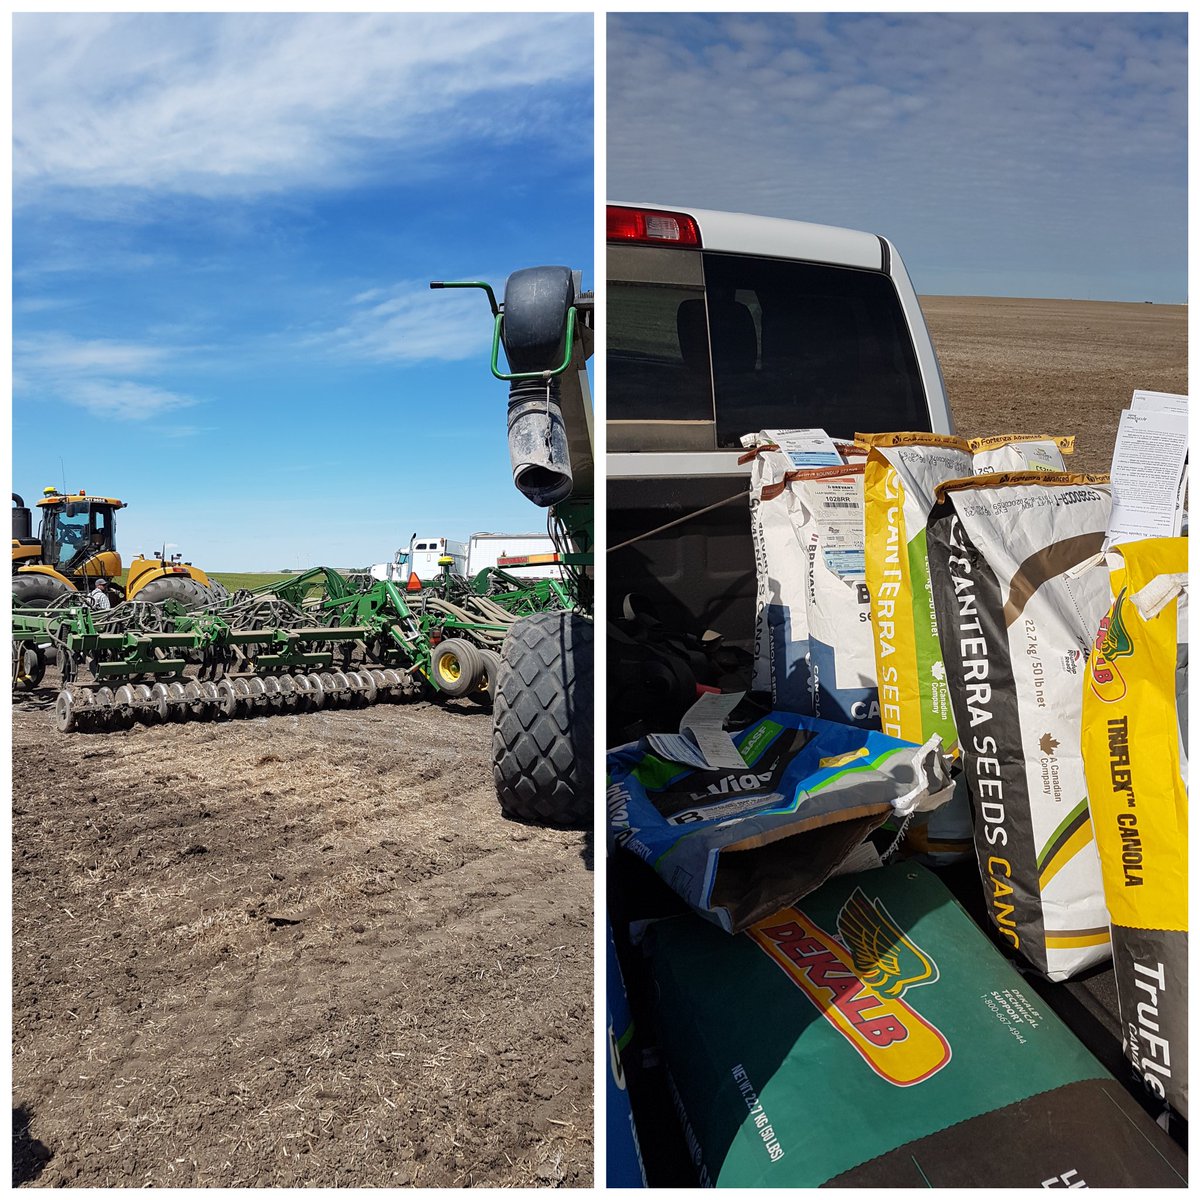 Another canola plot in the ground today @canterraseeds thanks to Wintering Hills colony and @UFAcooperative #plant20